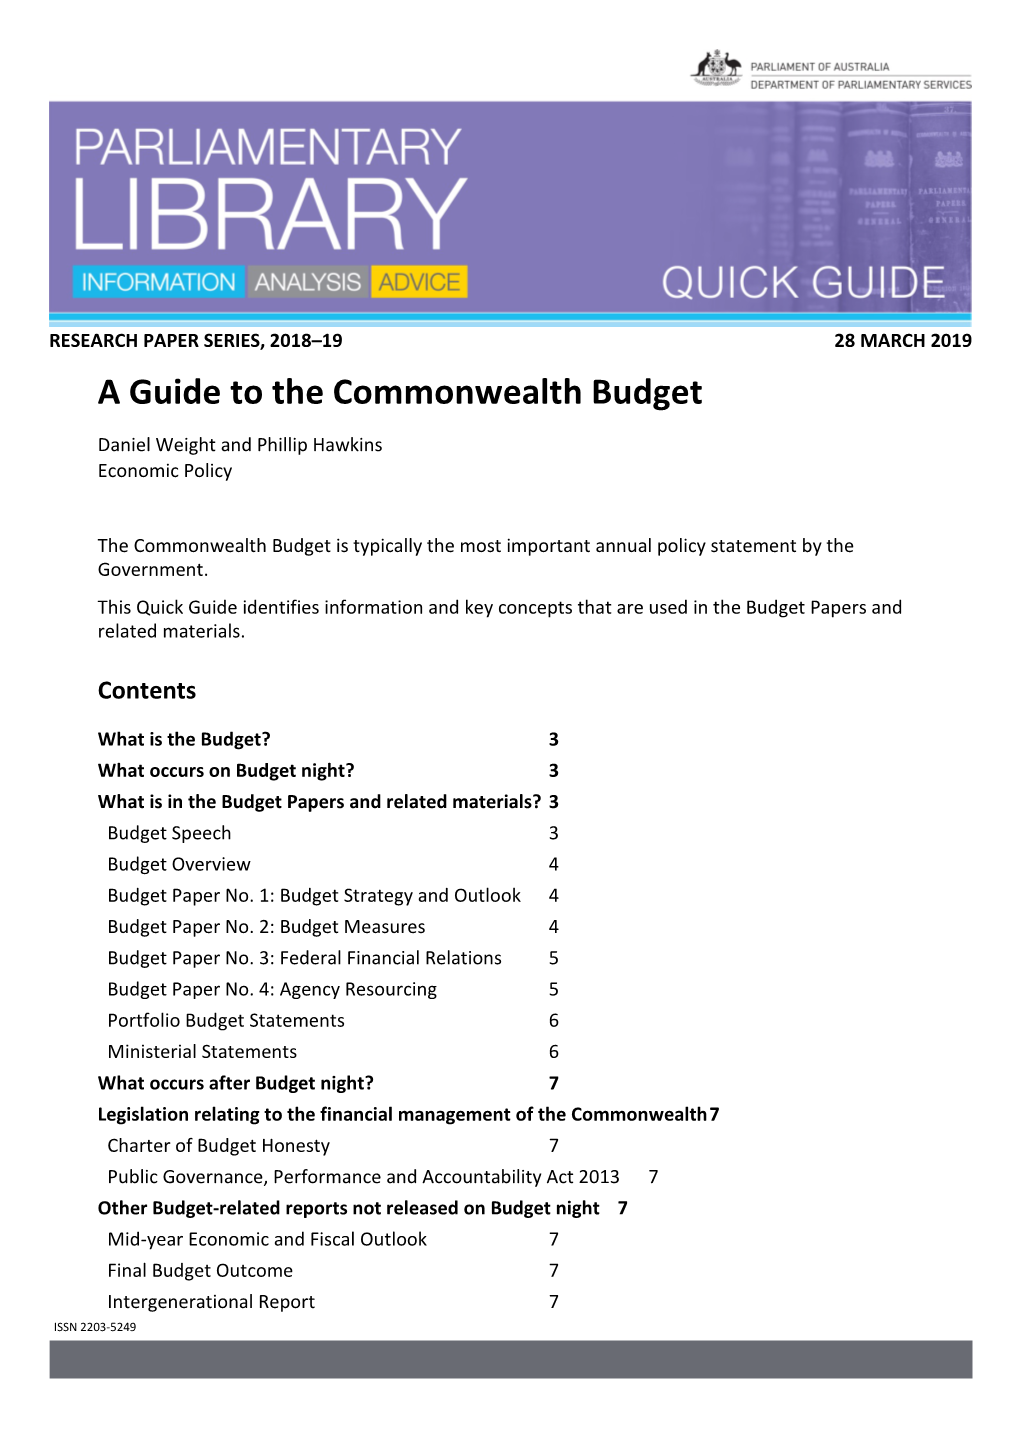 A Guide to the Commonwealth Budget